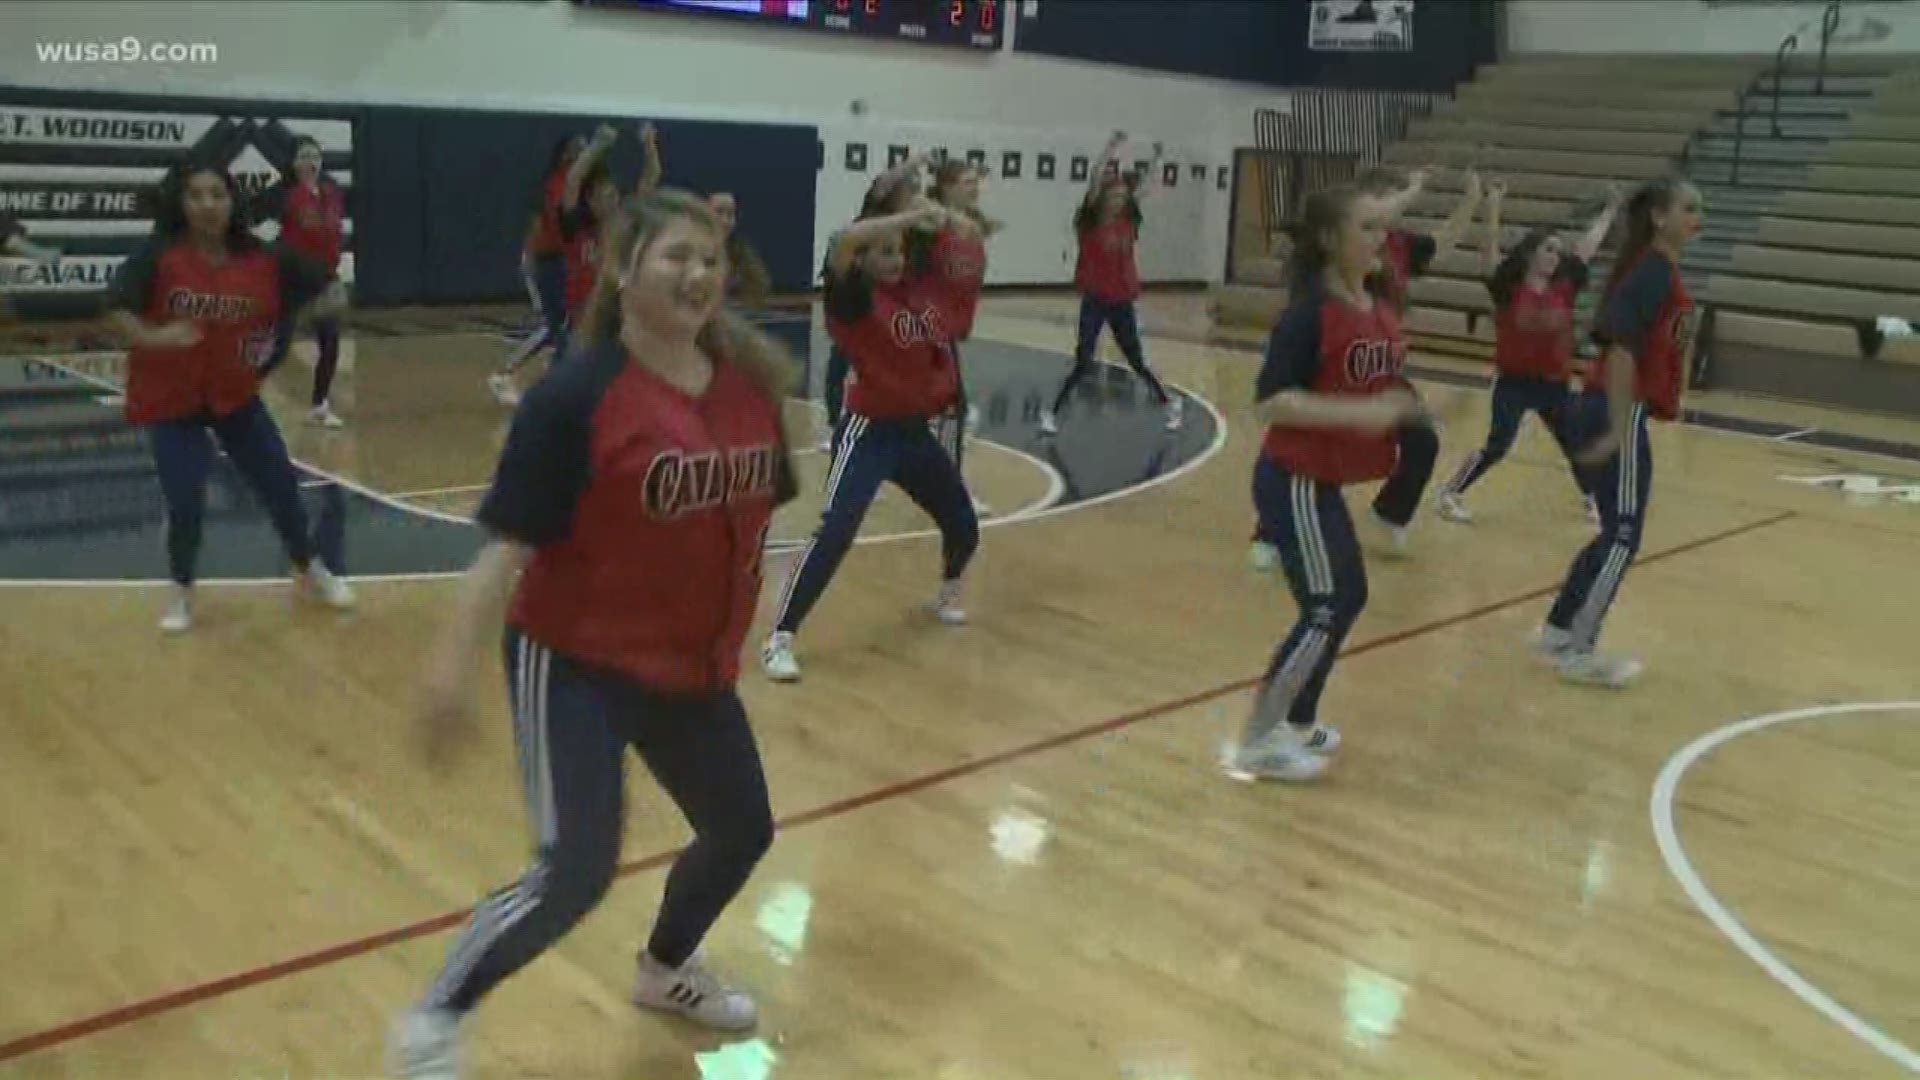 The Fairfax County school went all out Friday with a pep rally to cheer on the Washington Nationals.